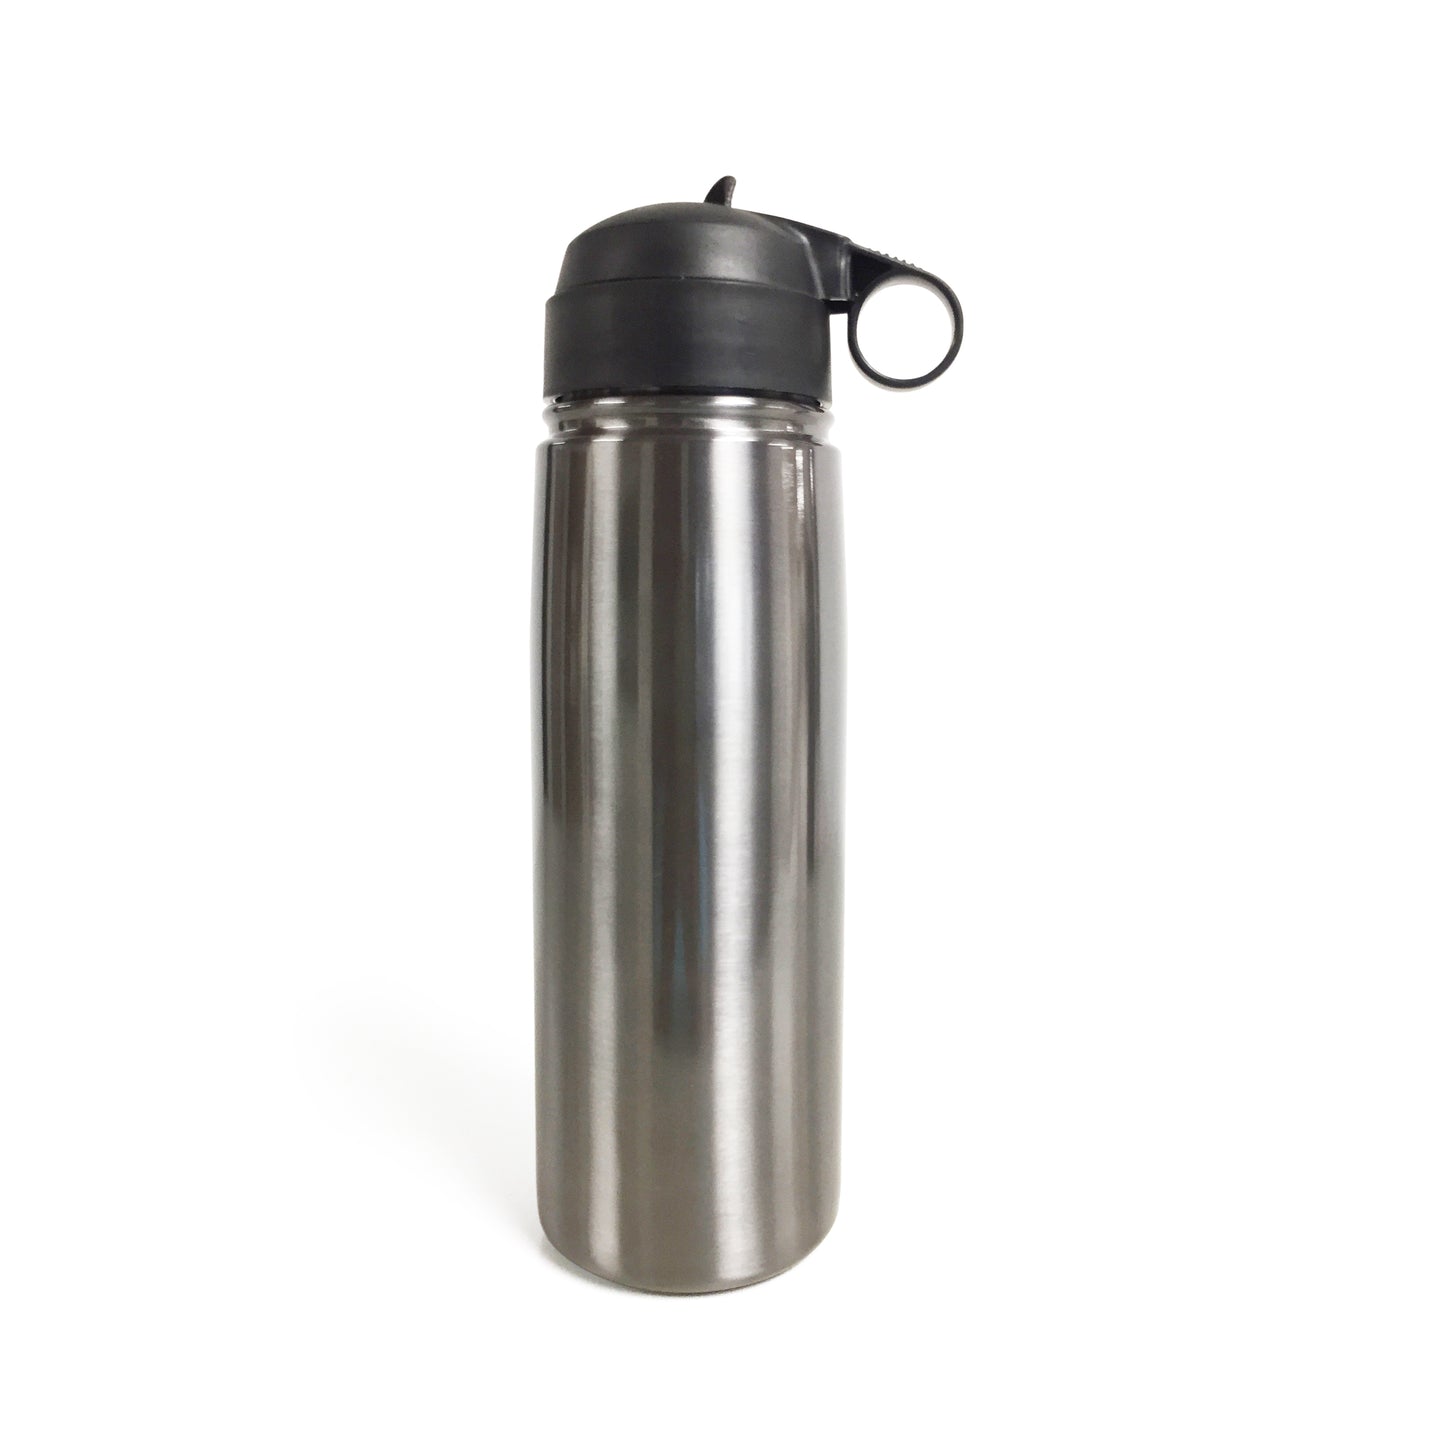 Filtering Stainless Steel Water Bottle - Black Matte - Water Pitch